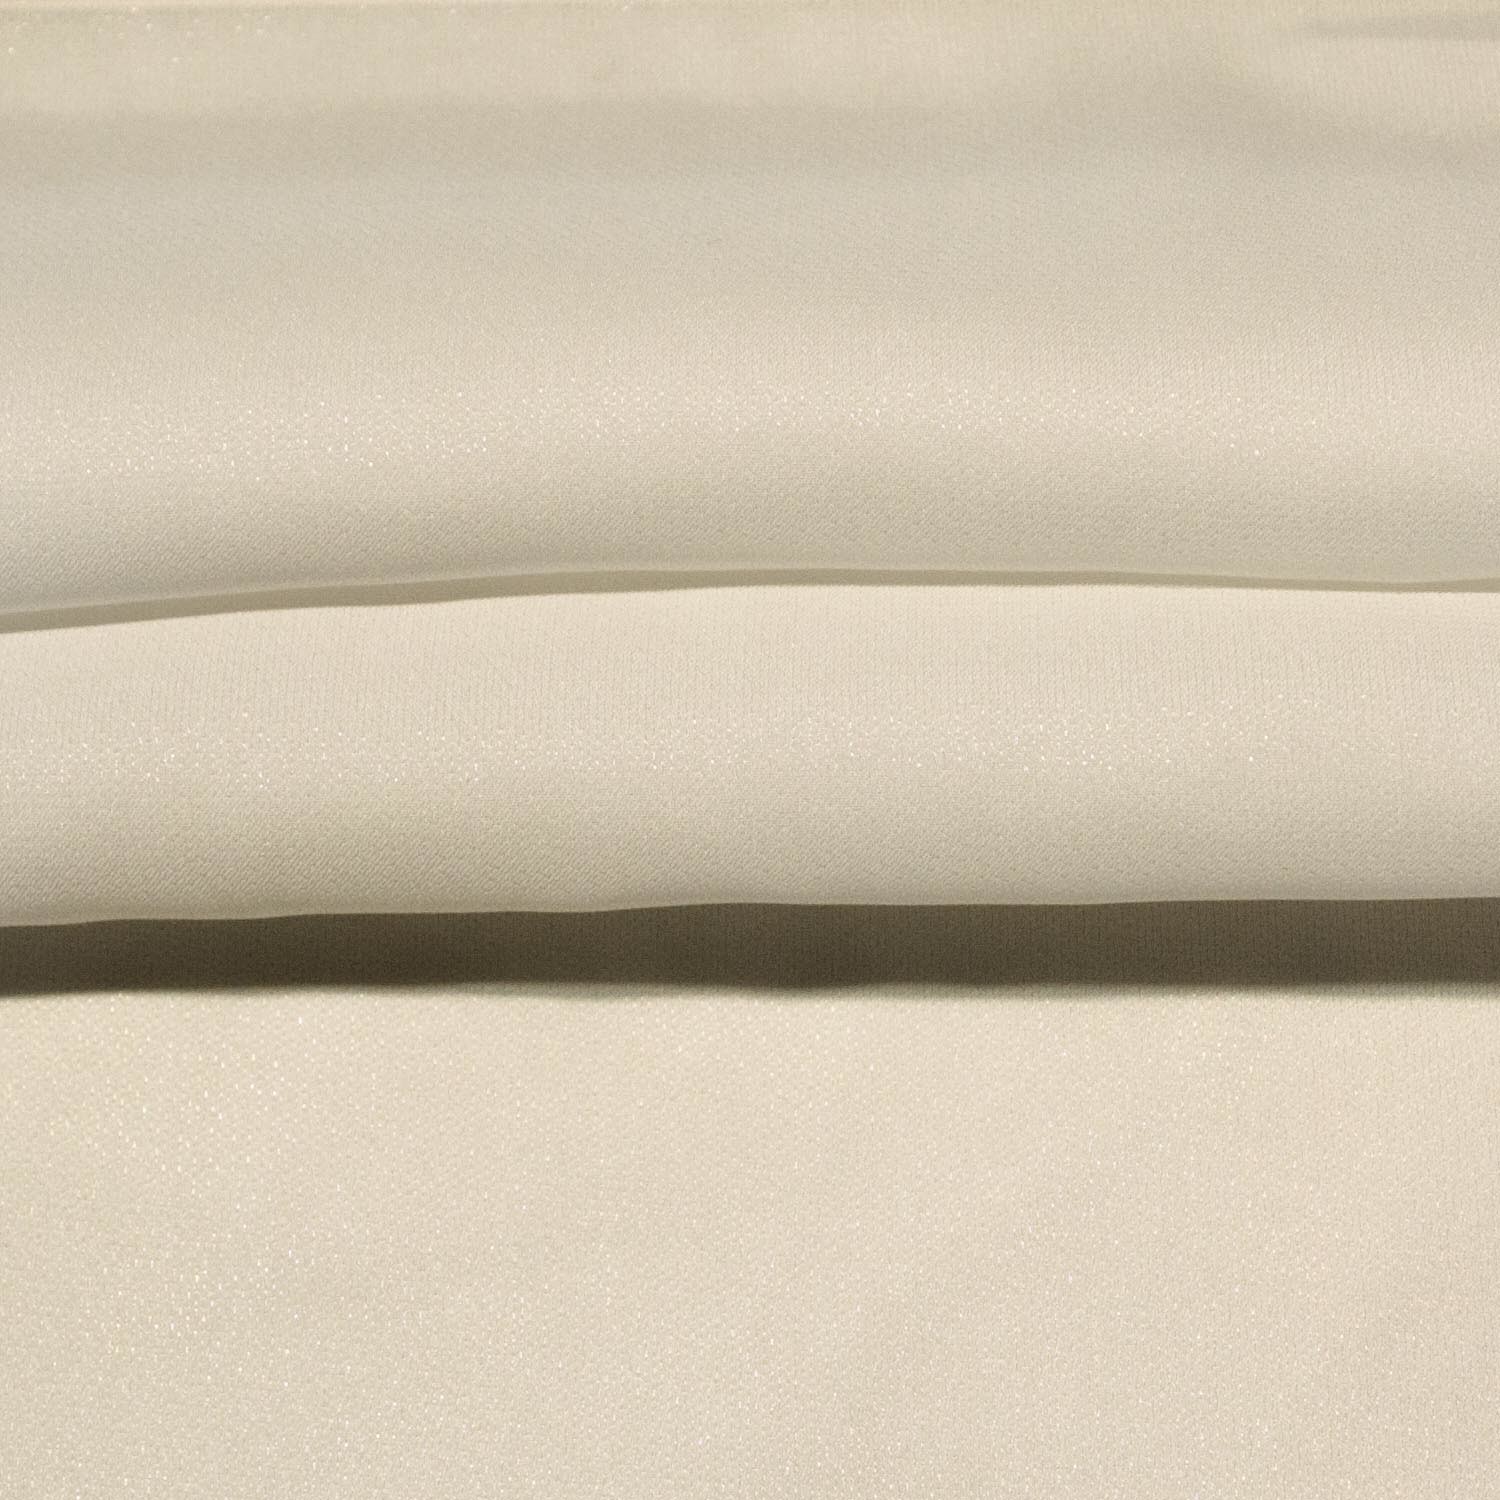 Chiffon Chemical Fiber Dyed Polyester Fabric for Dress Skirt Curtain